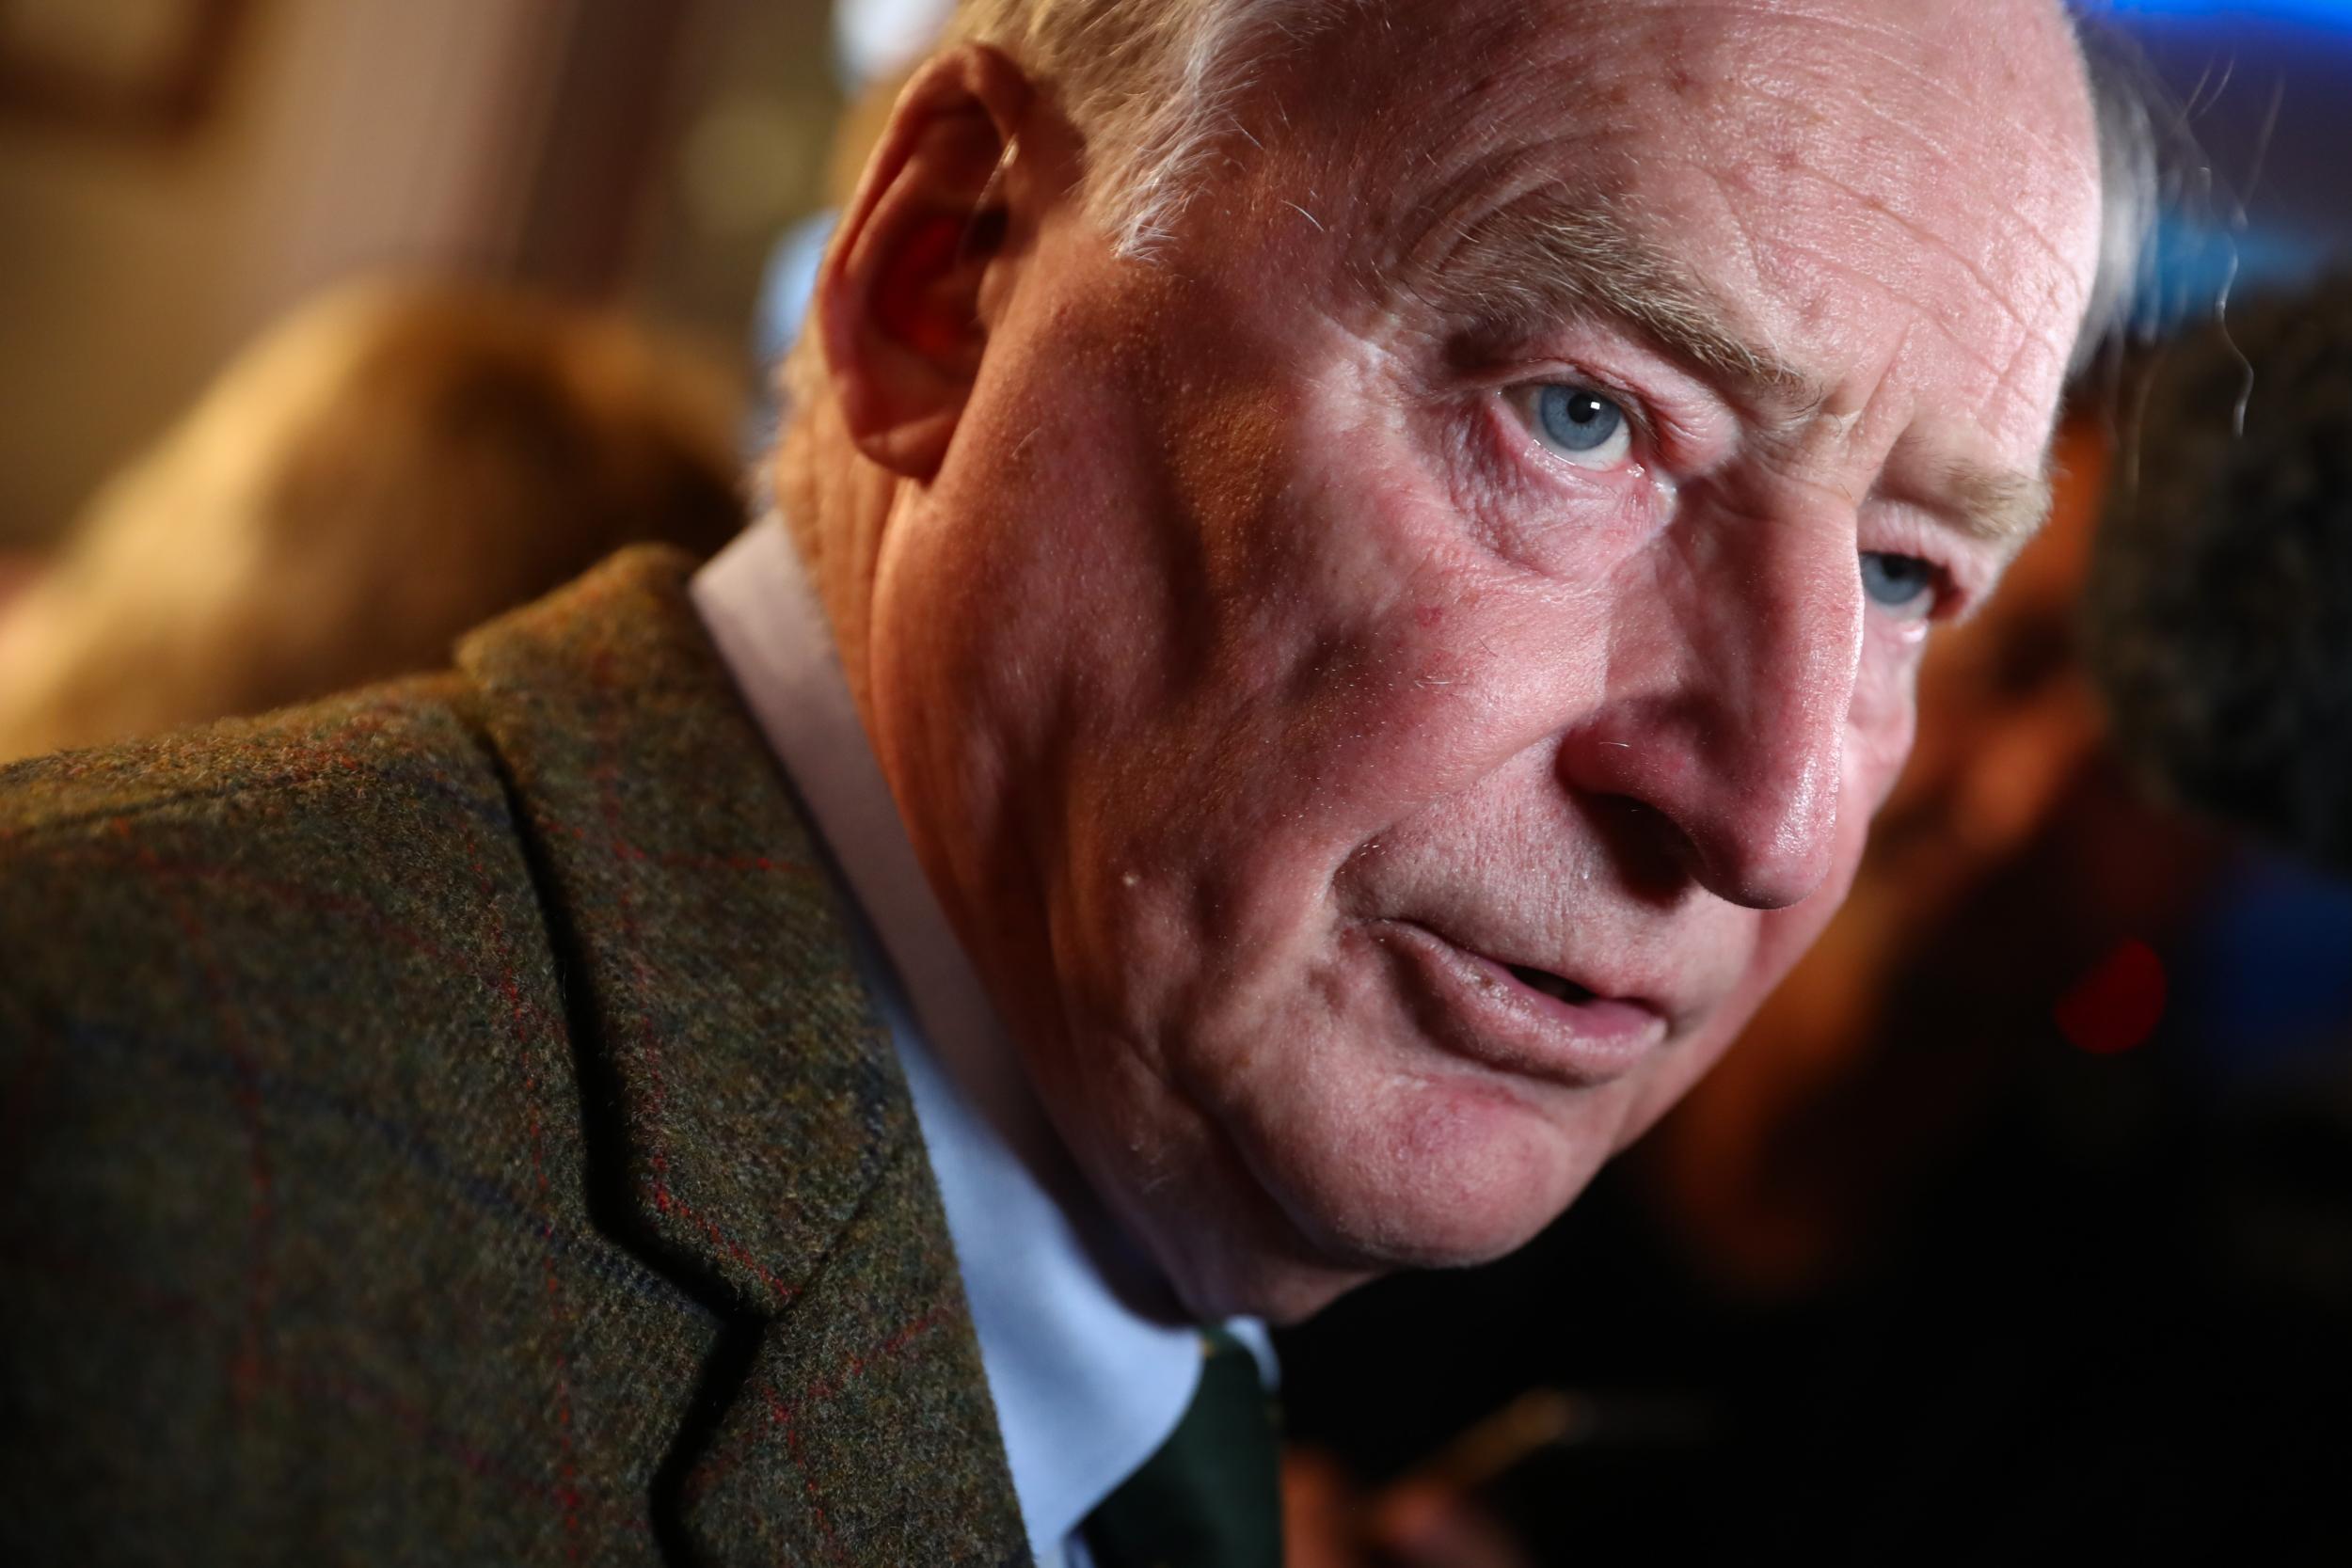 Alexander Gauland said he was pleased with his party's results